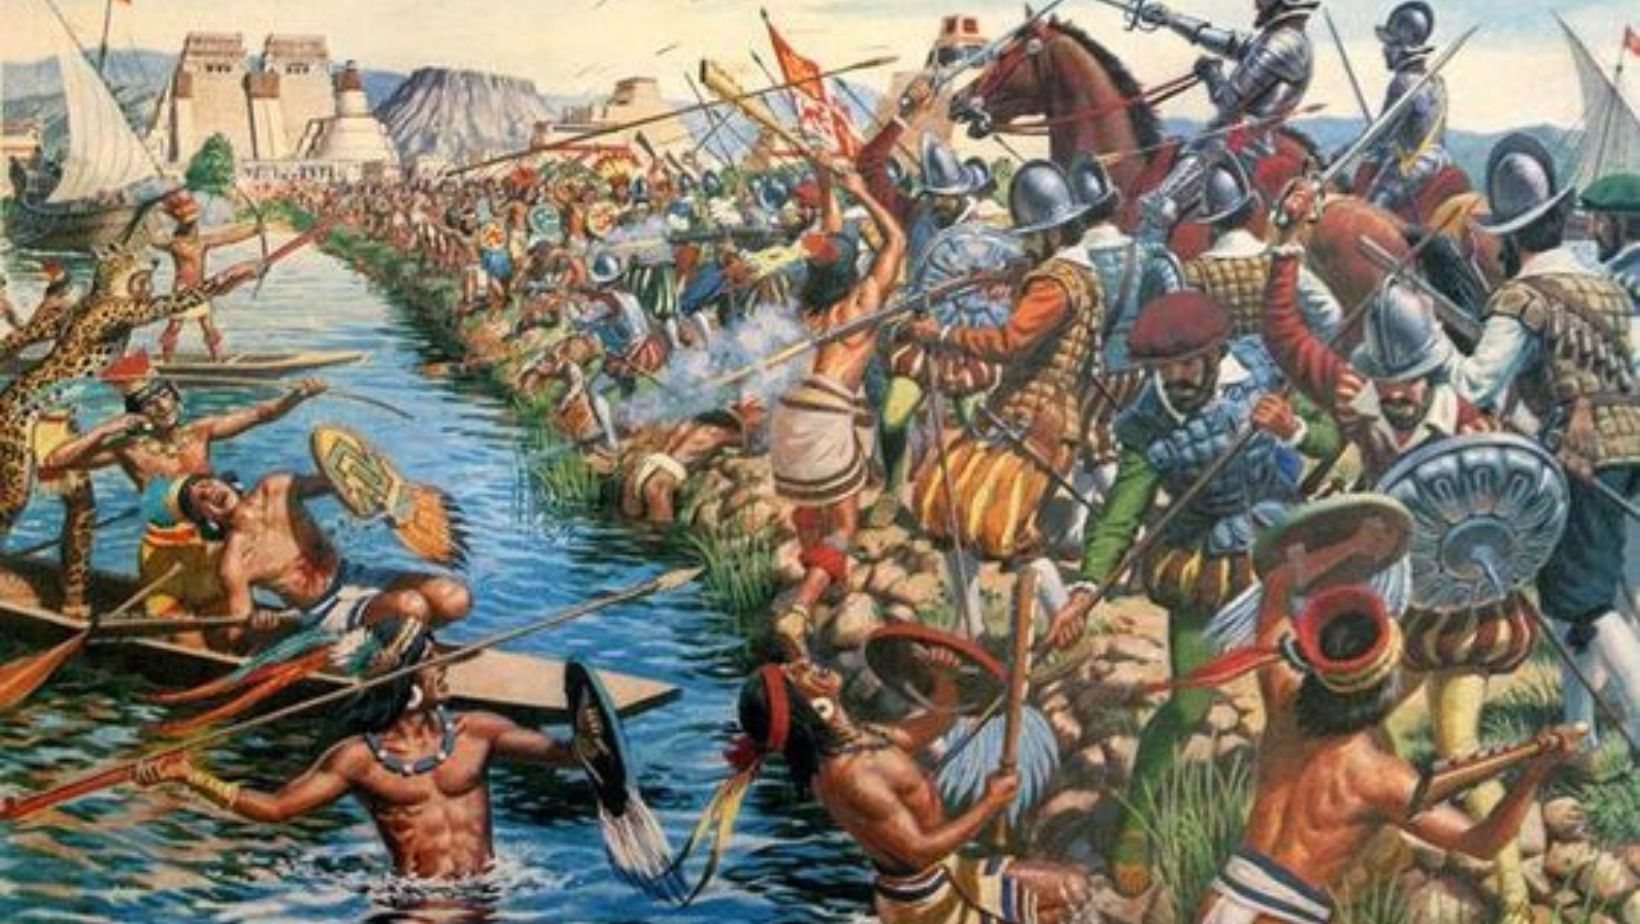 Fall of the Aztec Empire